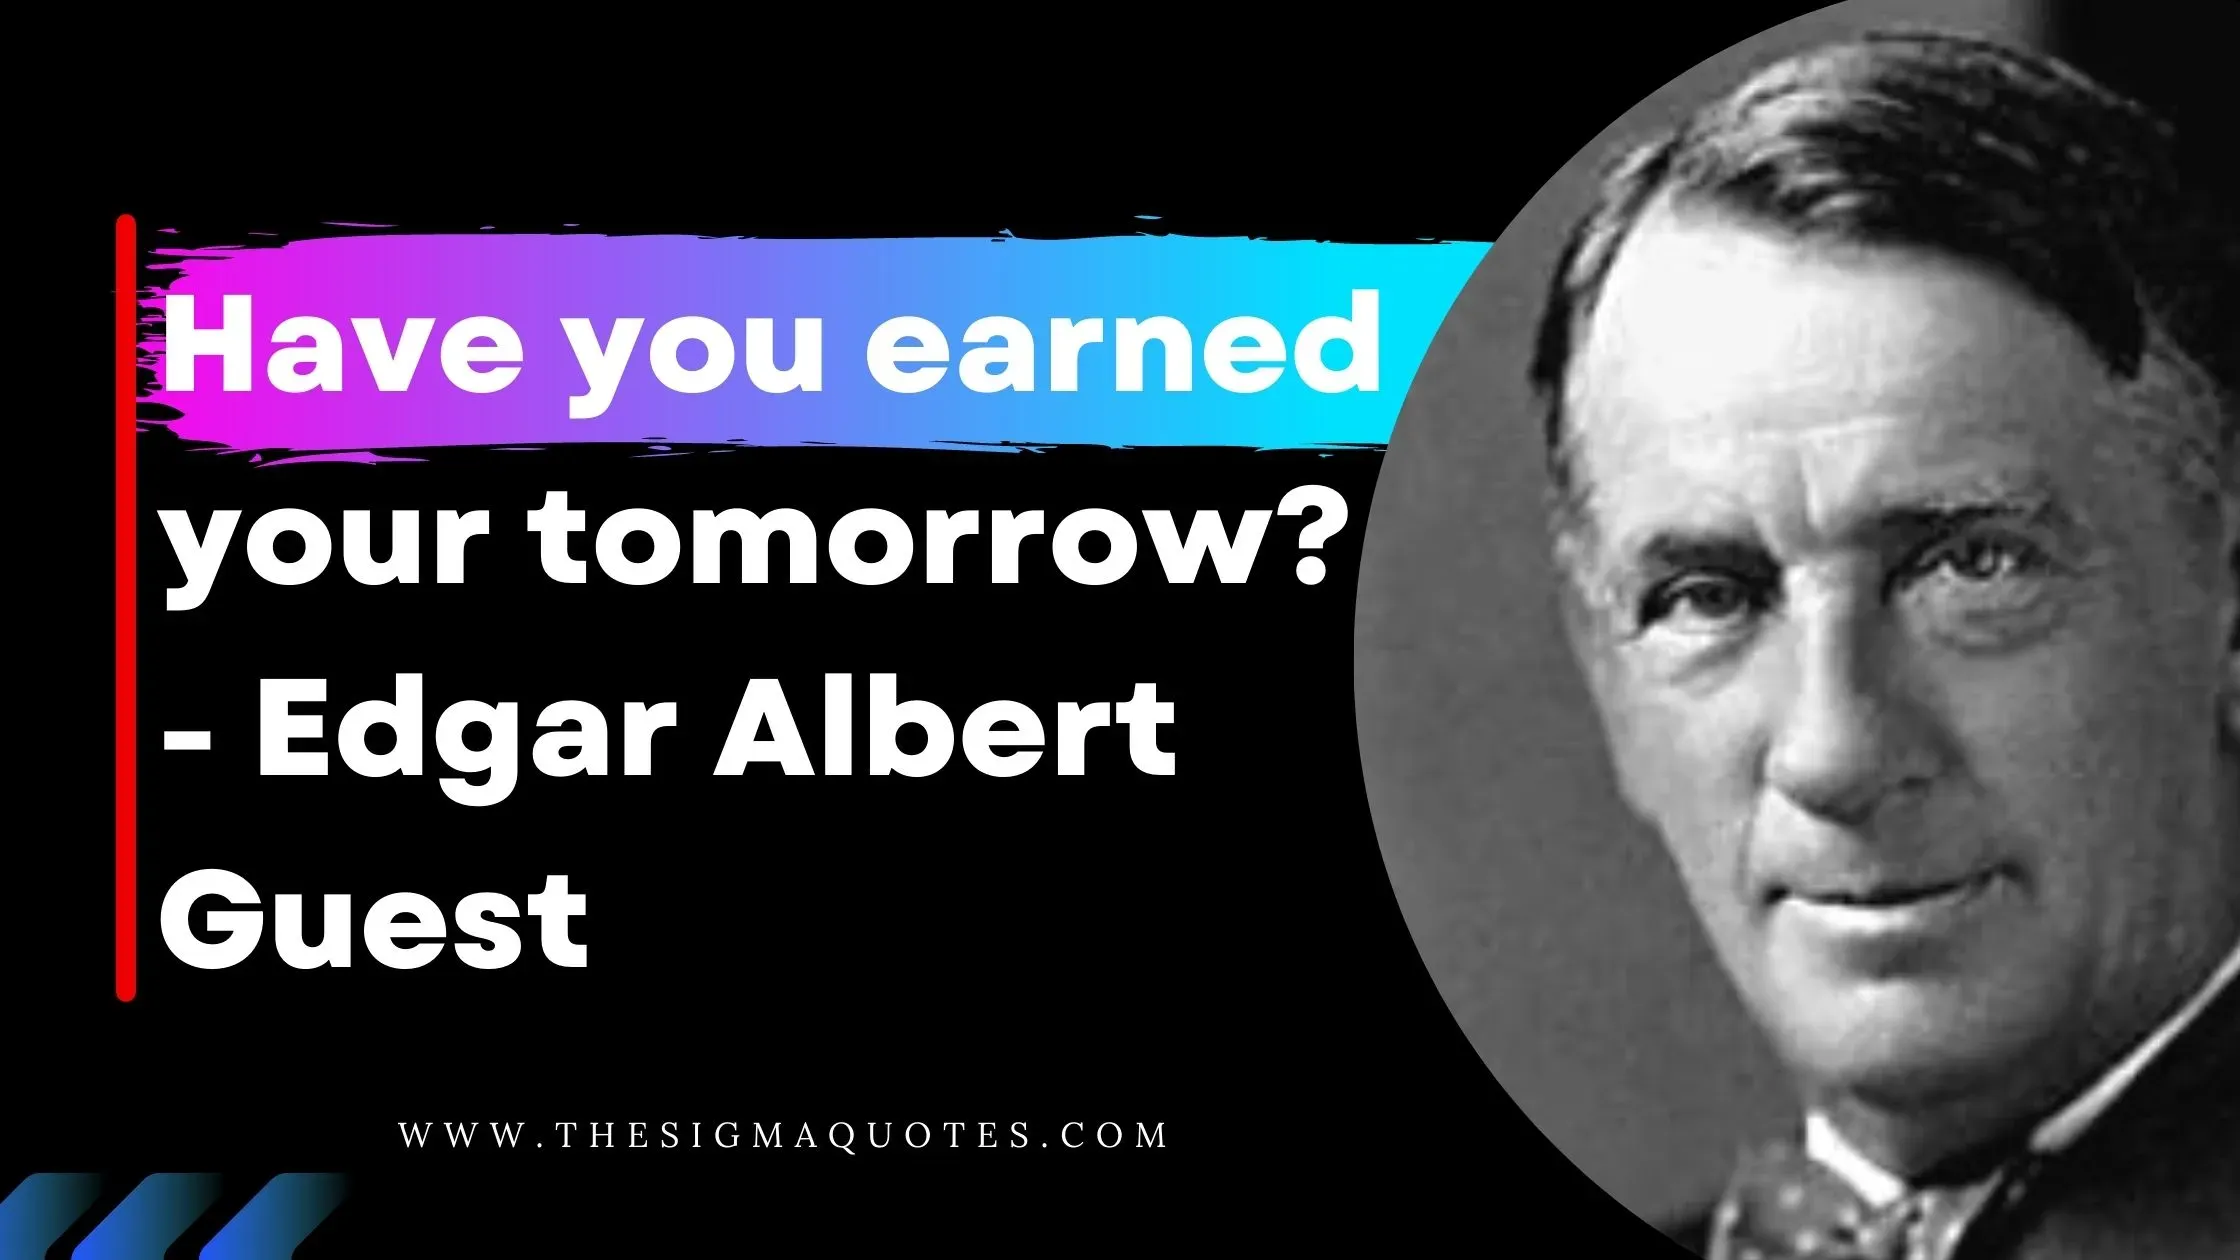 Have you earned your tomorrow? -  Edgar Albert Guest